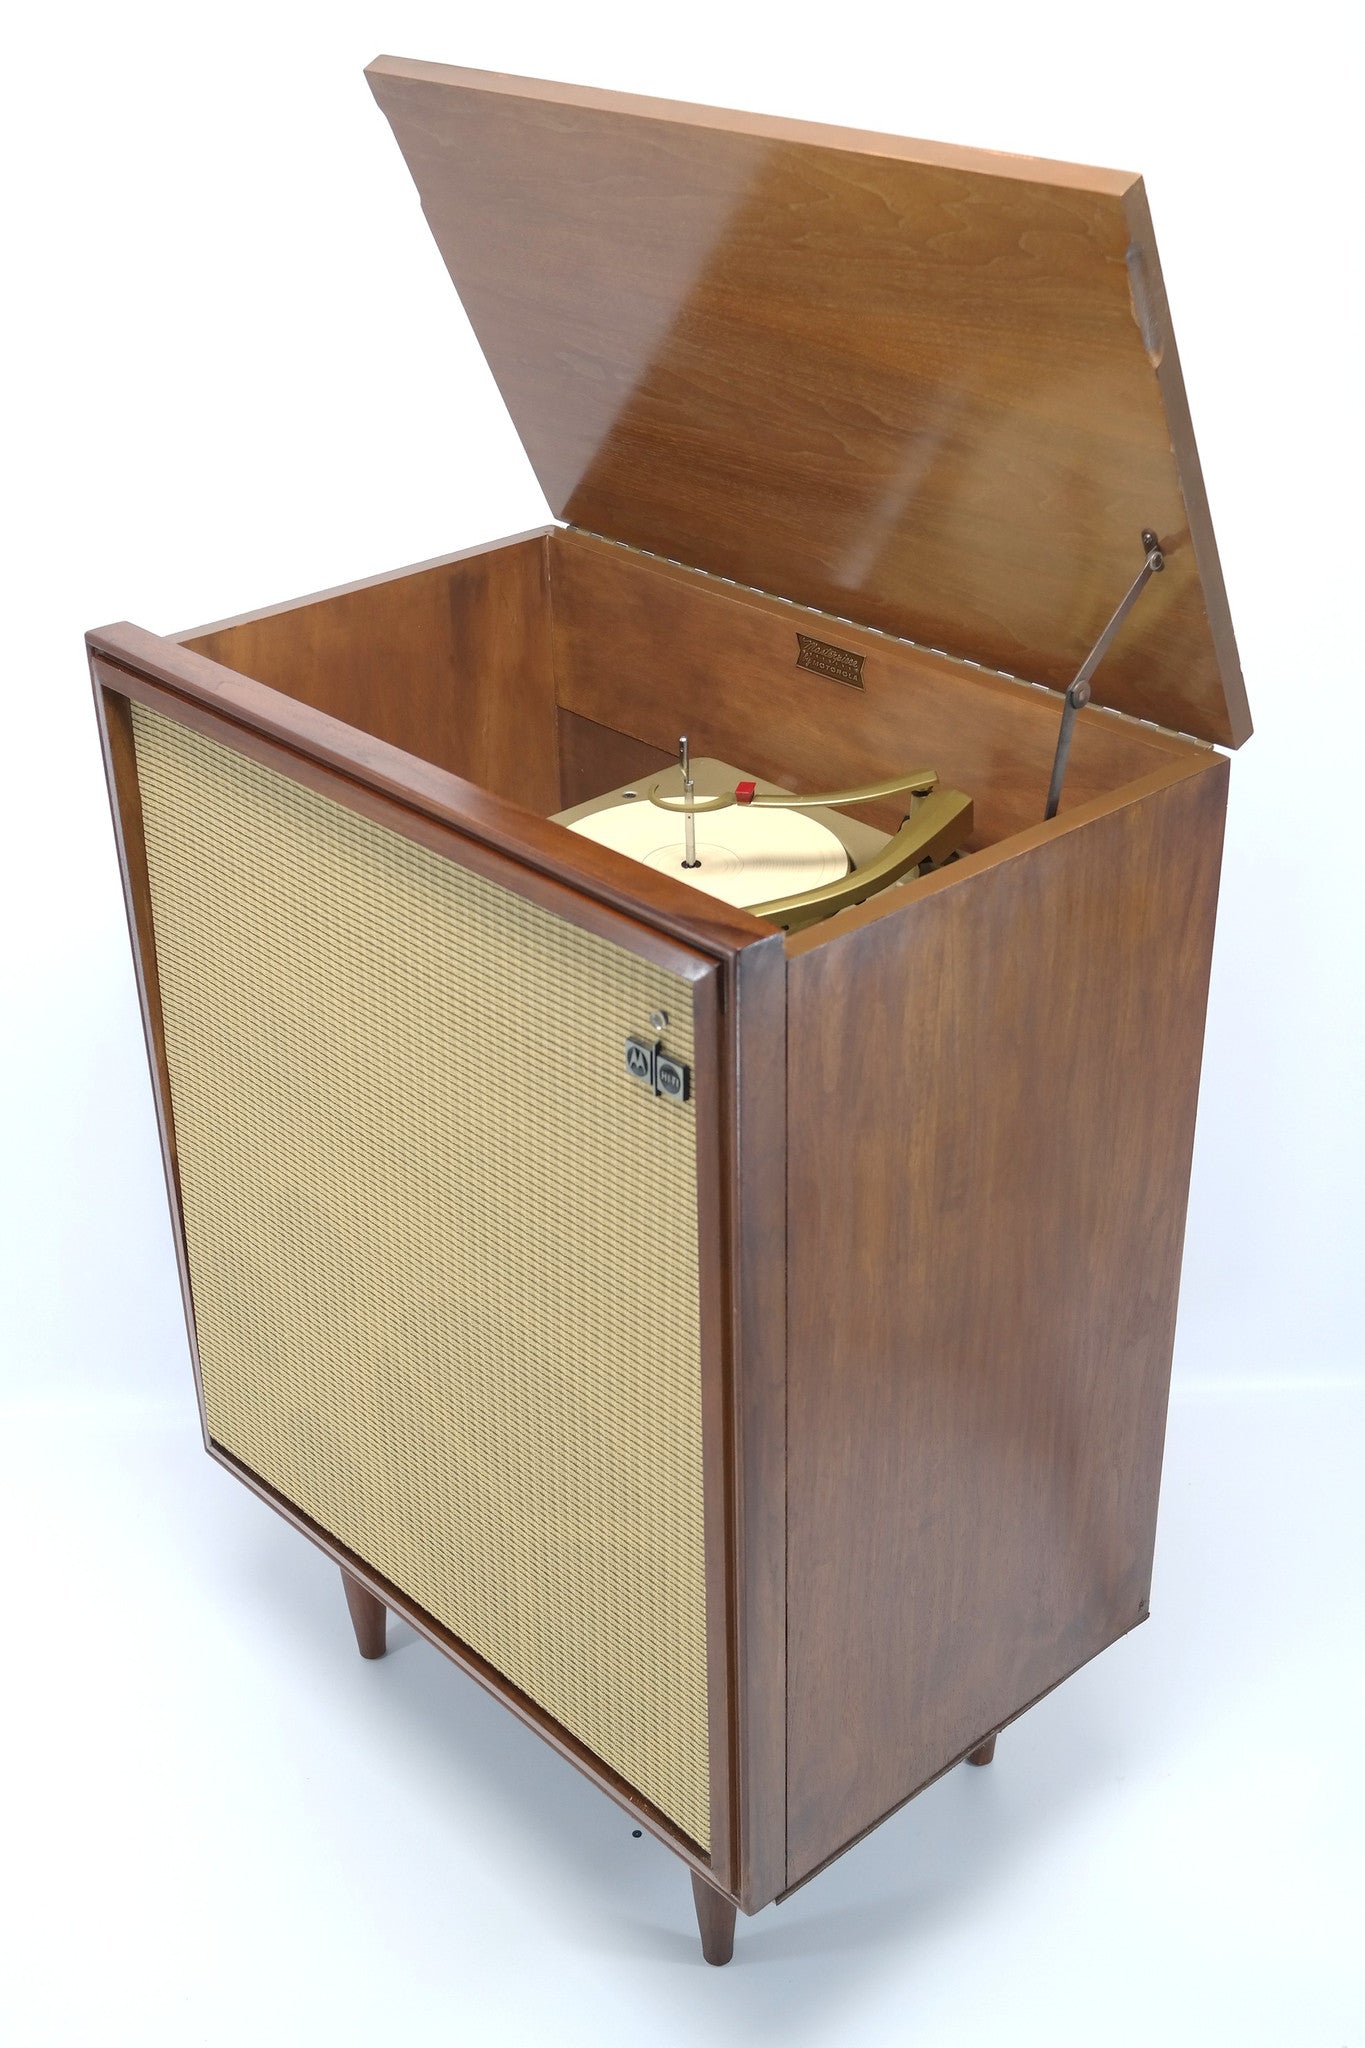 MCM STEREO - 60's - Mid Century Motorola Record Player - Bluetooth iPod iPhone Android The Vintedge Co.